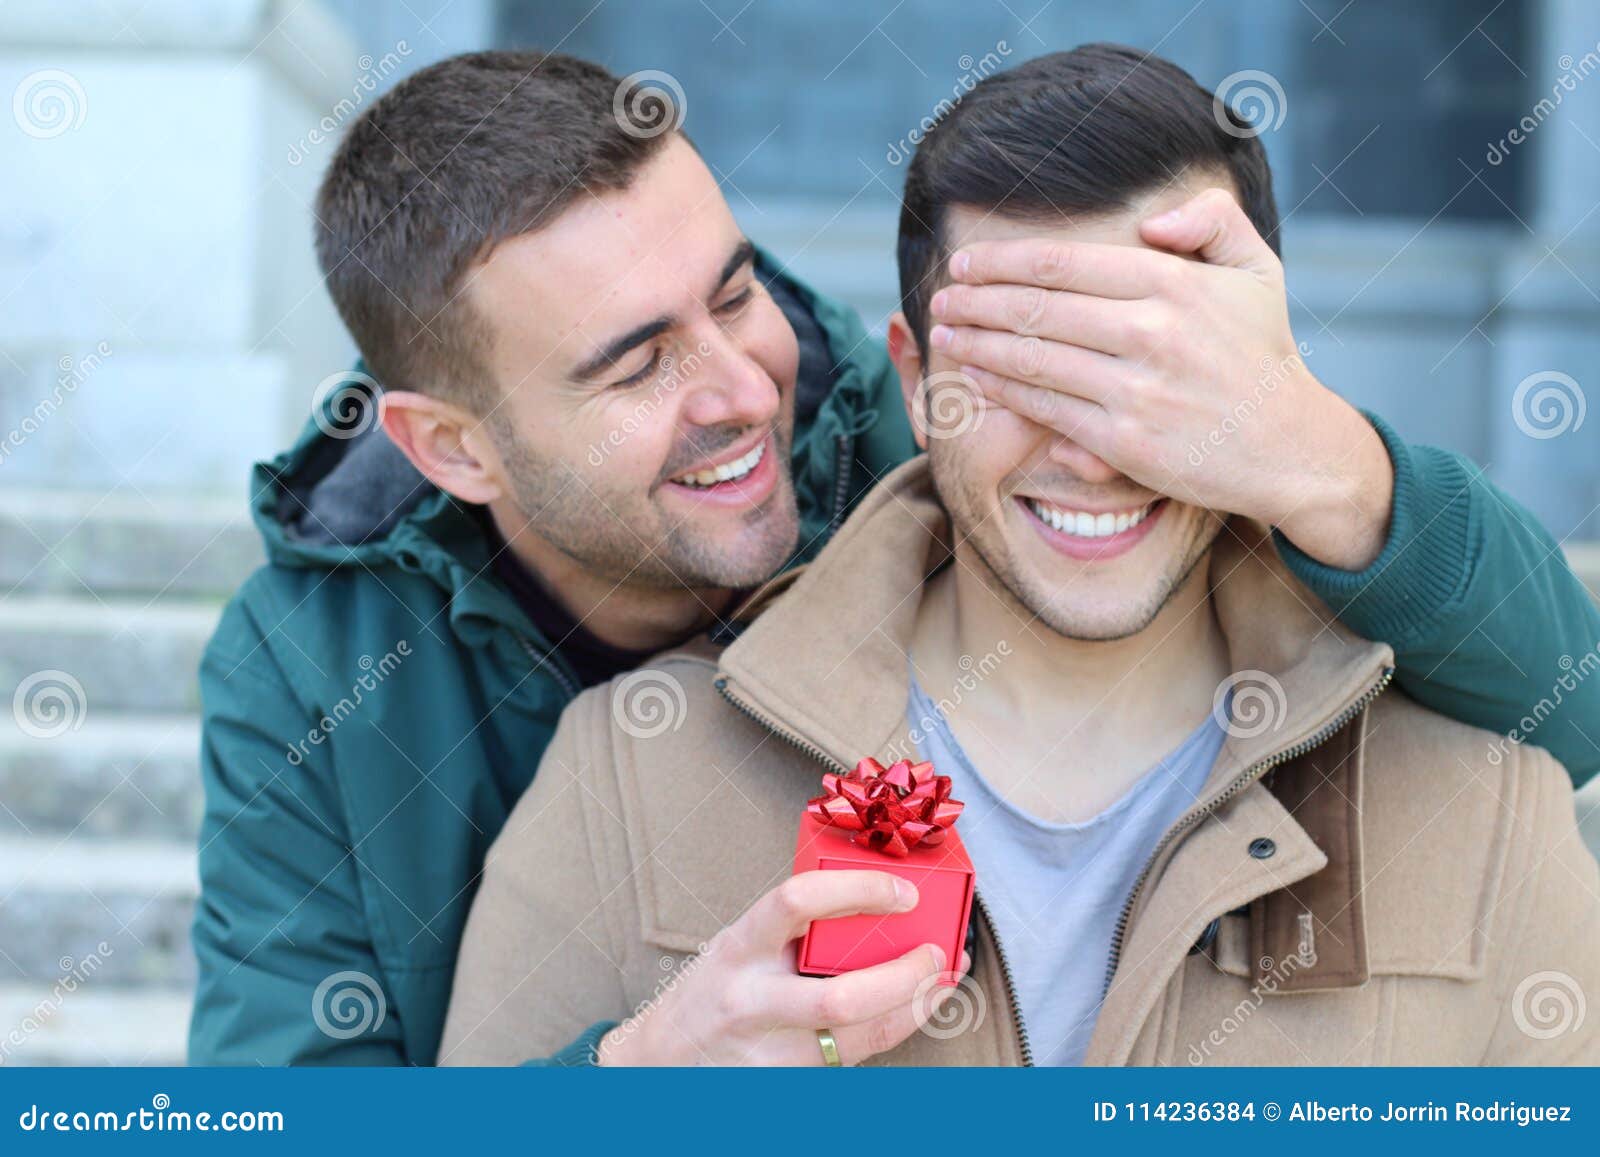 Lovely Same Sex Couple Sharing Affection Stock Photo